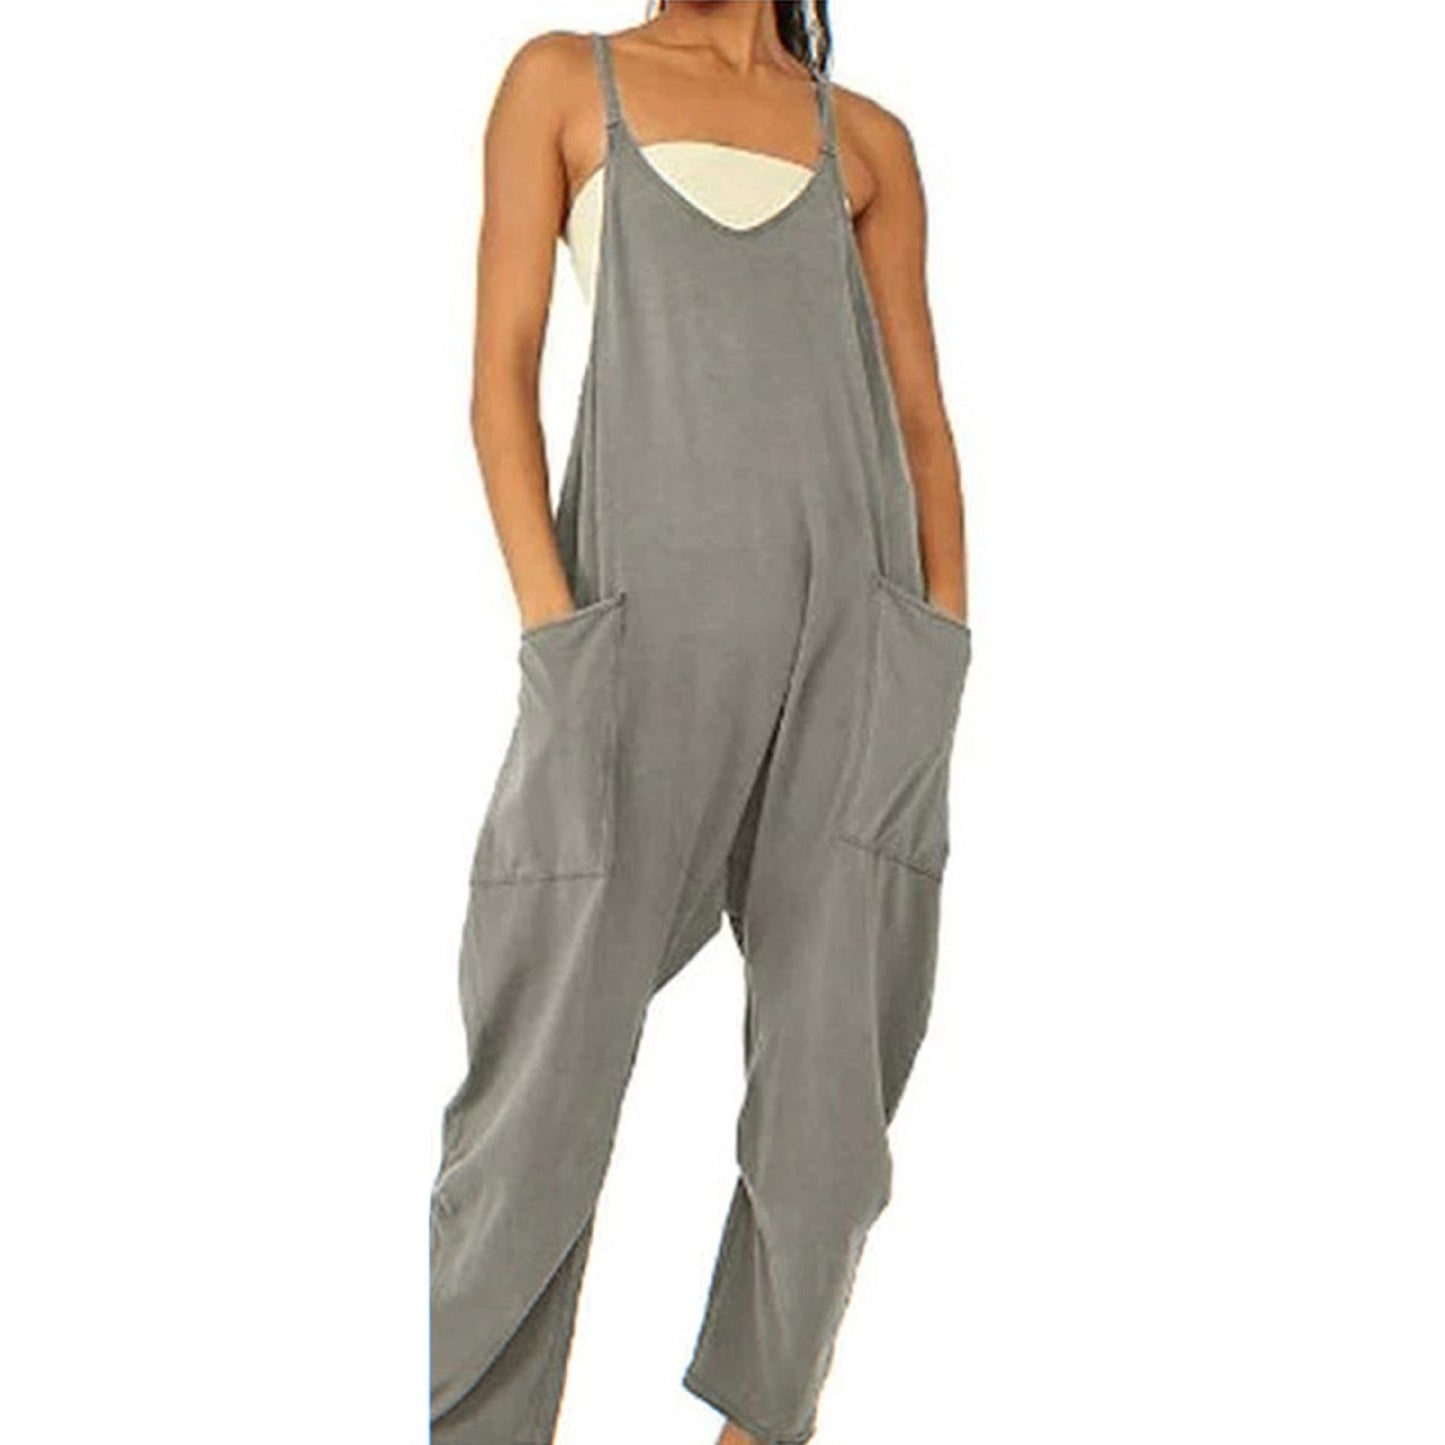 Urban Style Comfortable Romper - Jumpsuit with side pockets